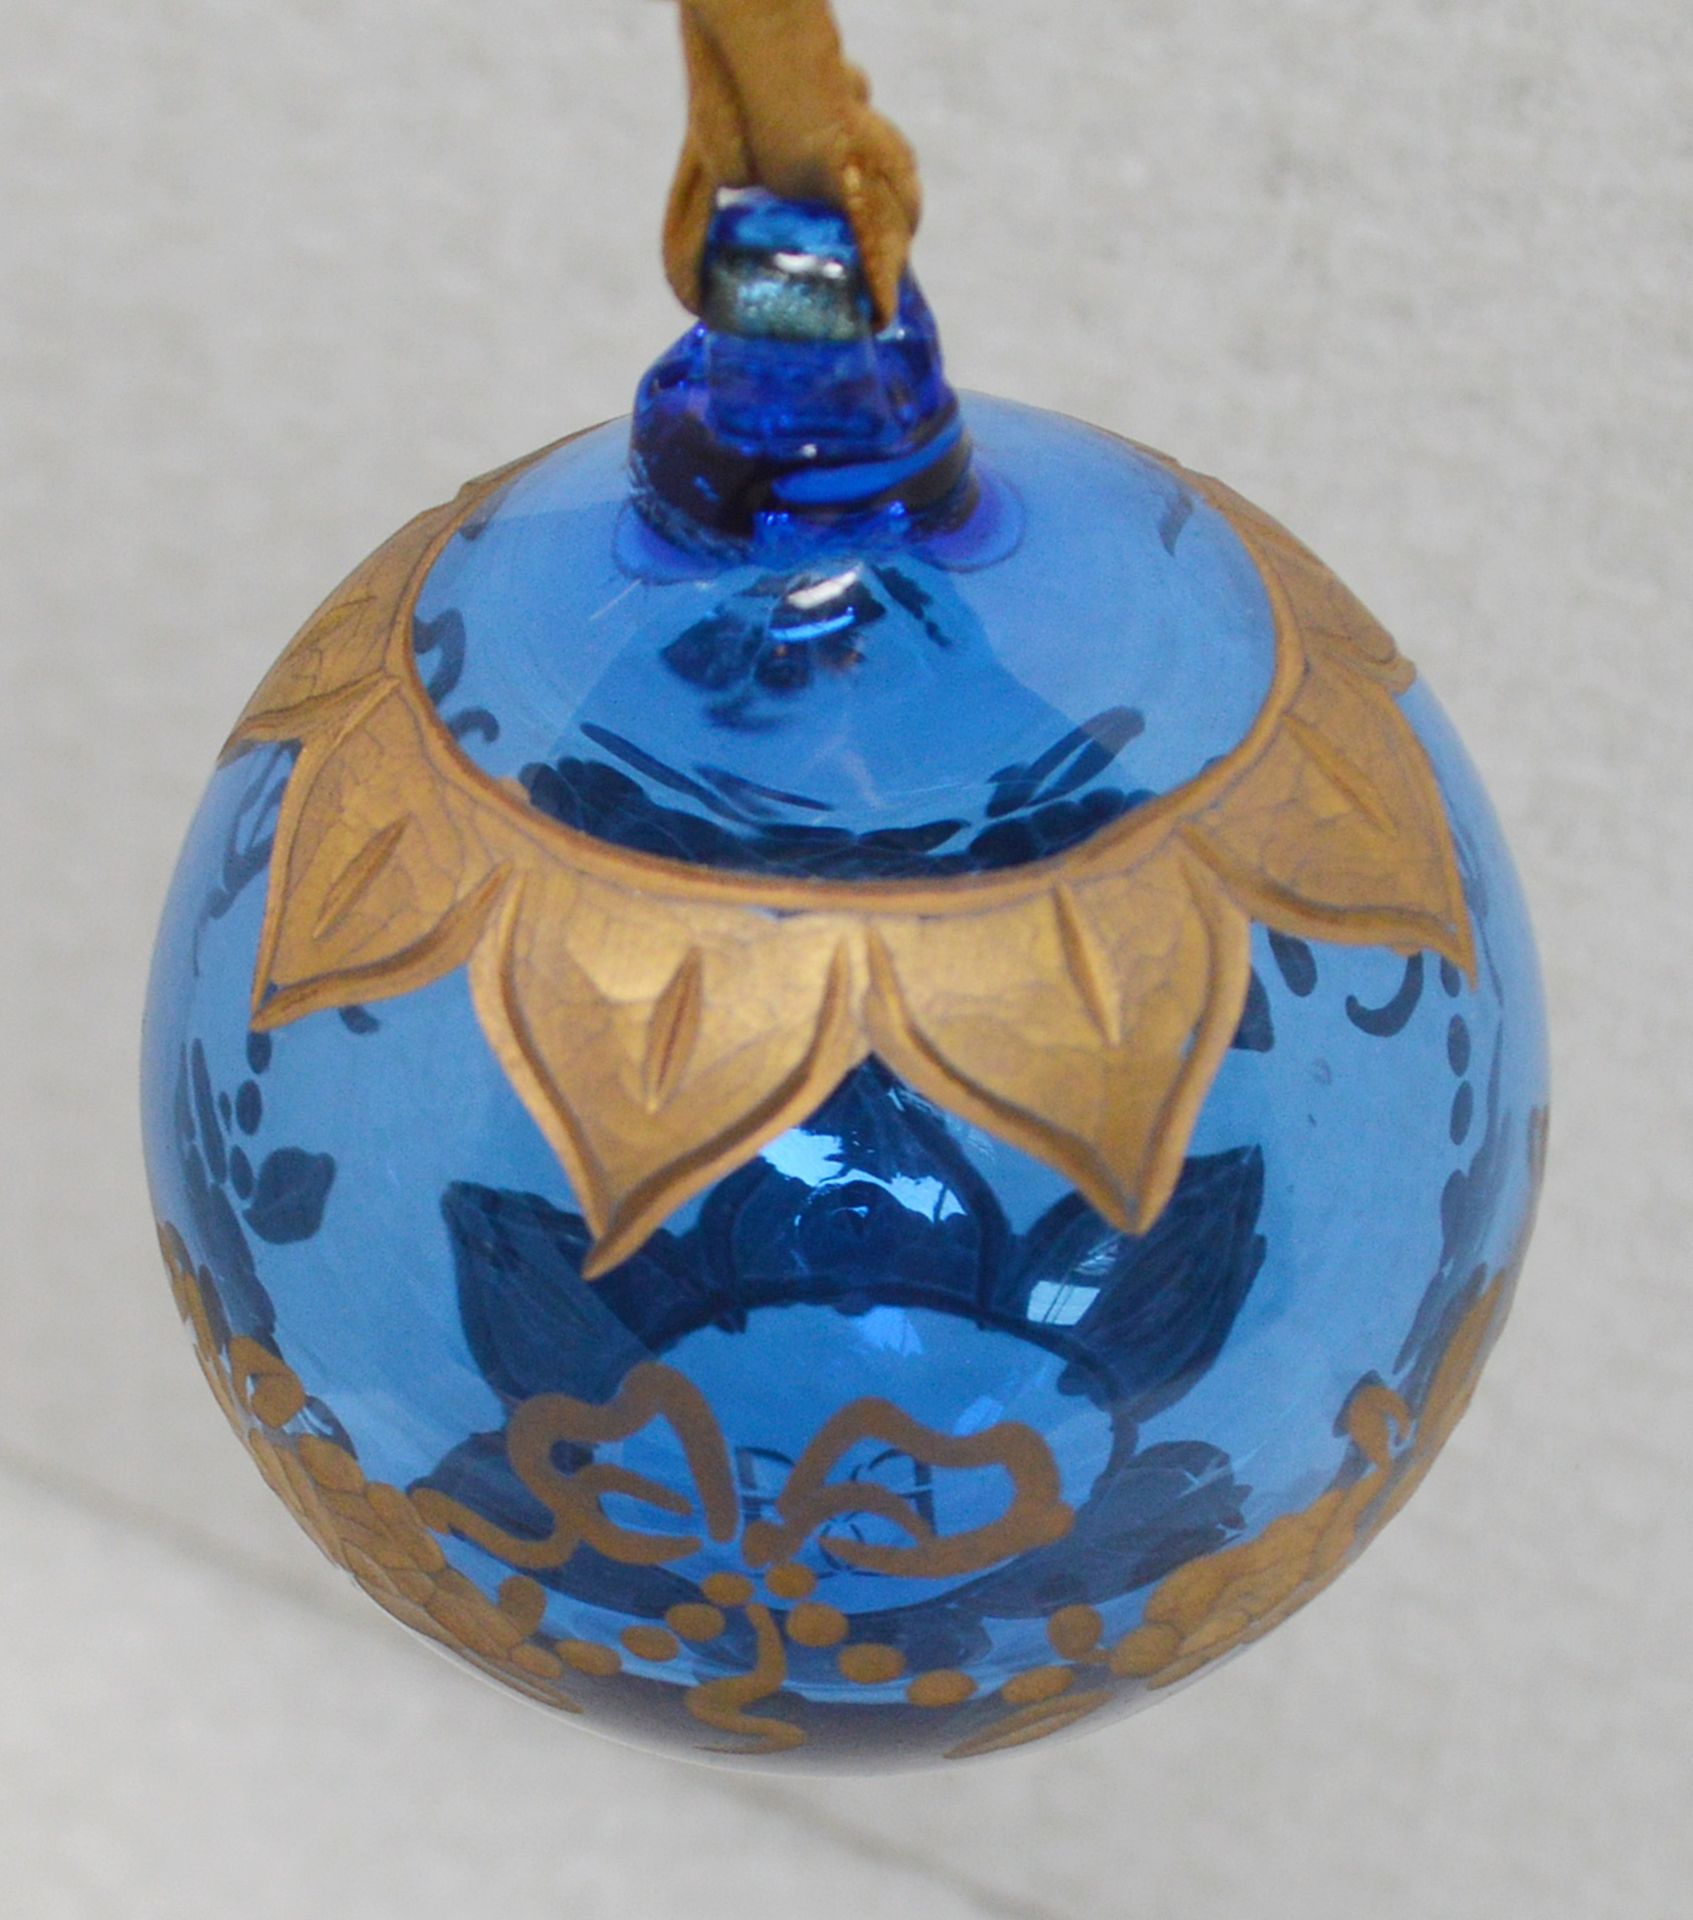 1 x BALDI 'Home Jewels' Italian Hand-crafted Artisan Glass Christmas Tree Decoration In Blue & Gold - Image 2 of 3